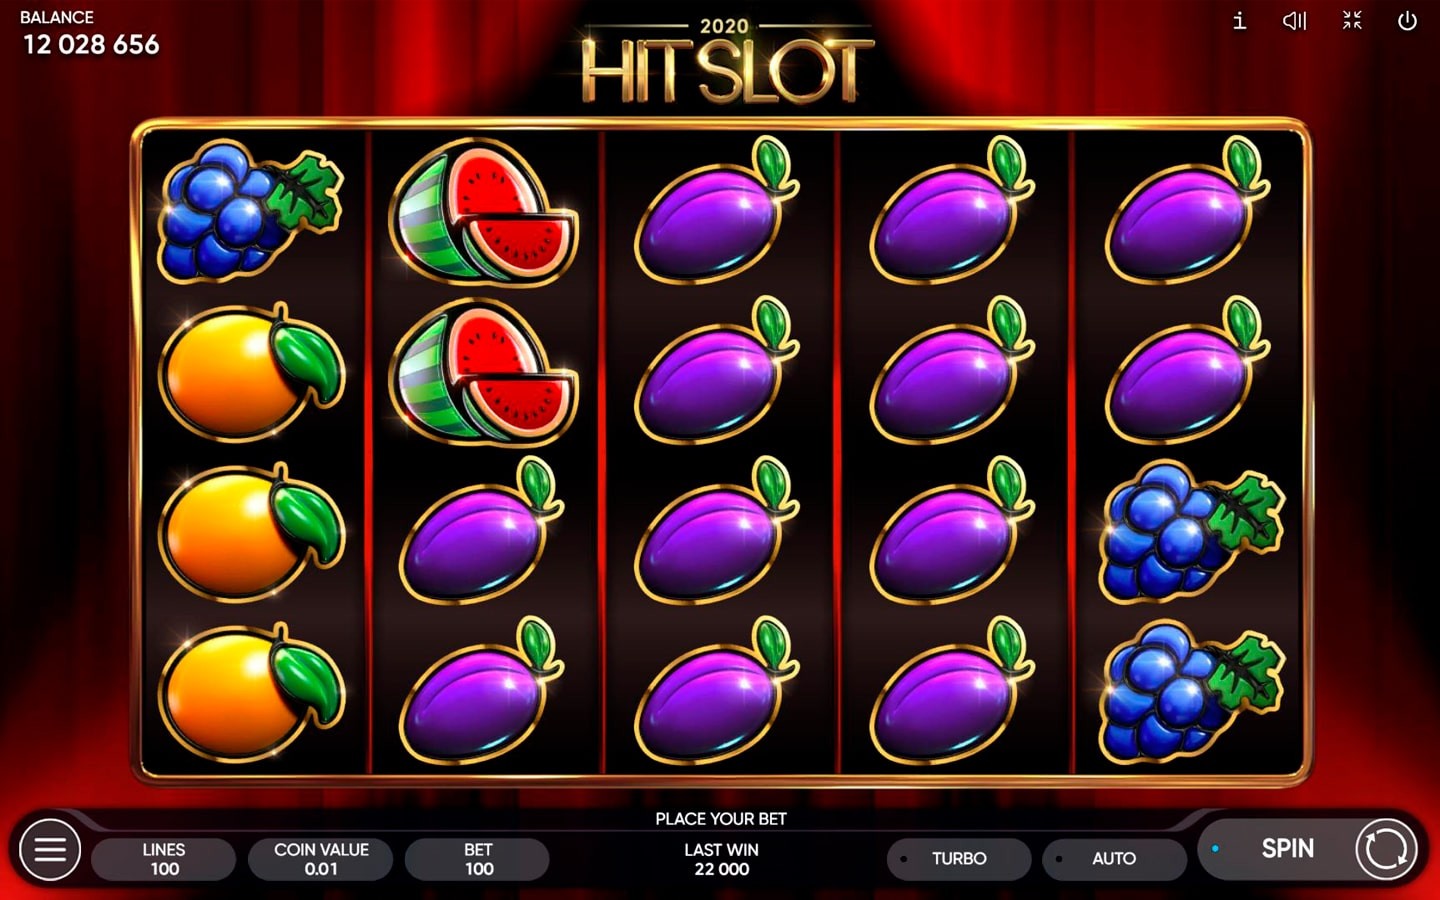 TOP FRUIT SLOTS | Play 2020 HIT SLOT now!